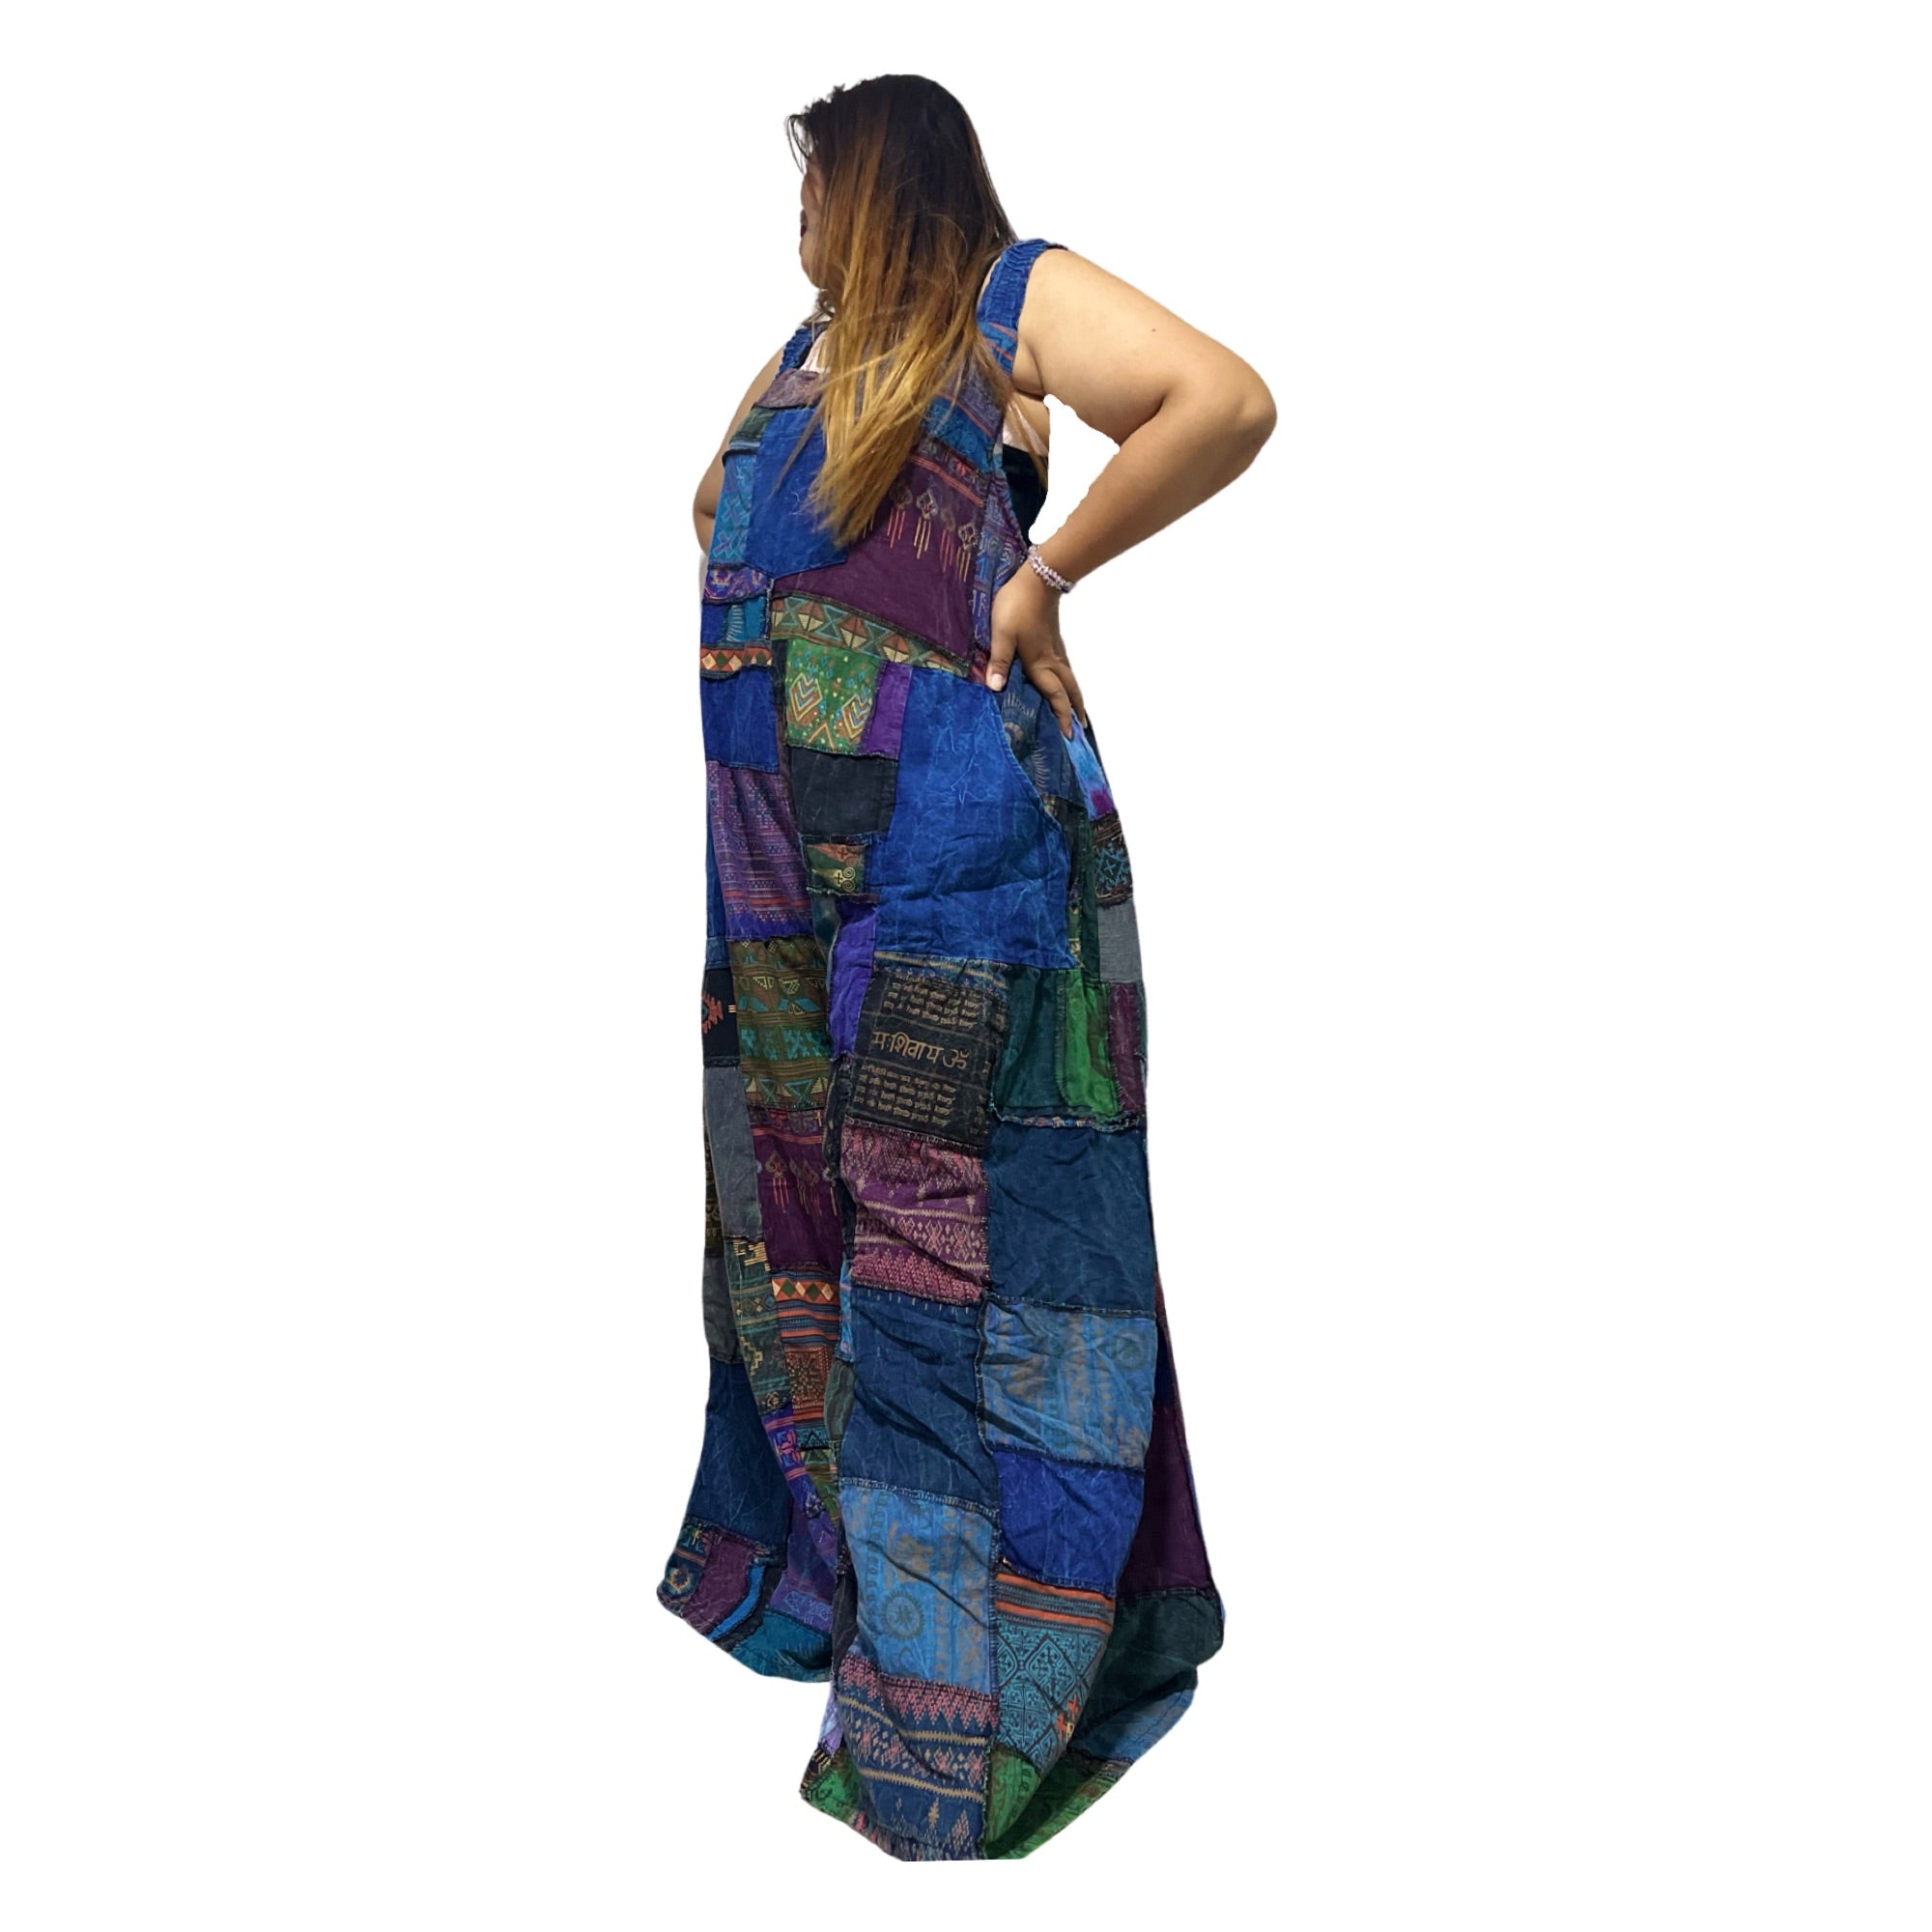 Plus-Size Patchwork Overall